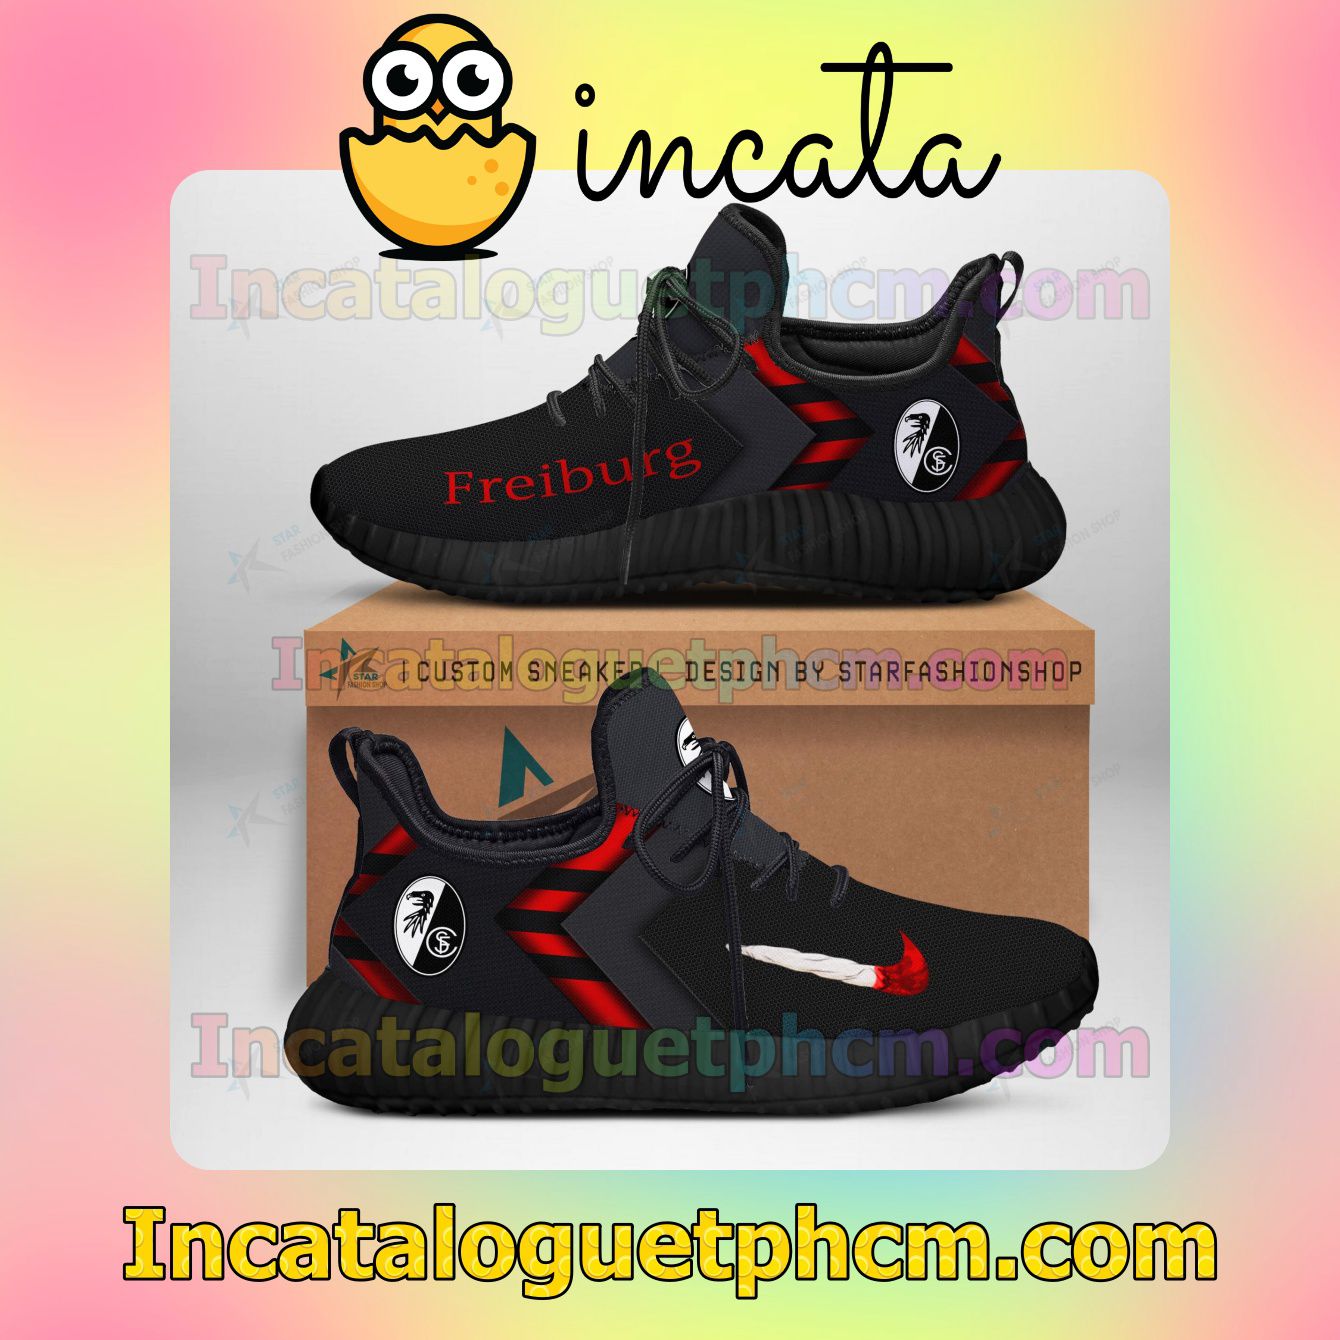 All Over Print SC Freiburg Ultraboost Yeezy Shoes Sneakers